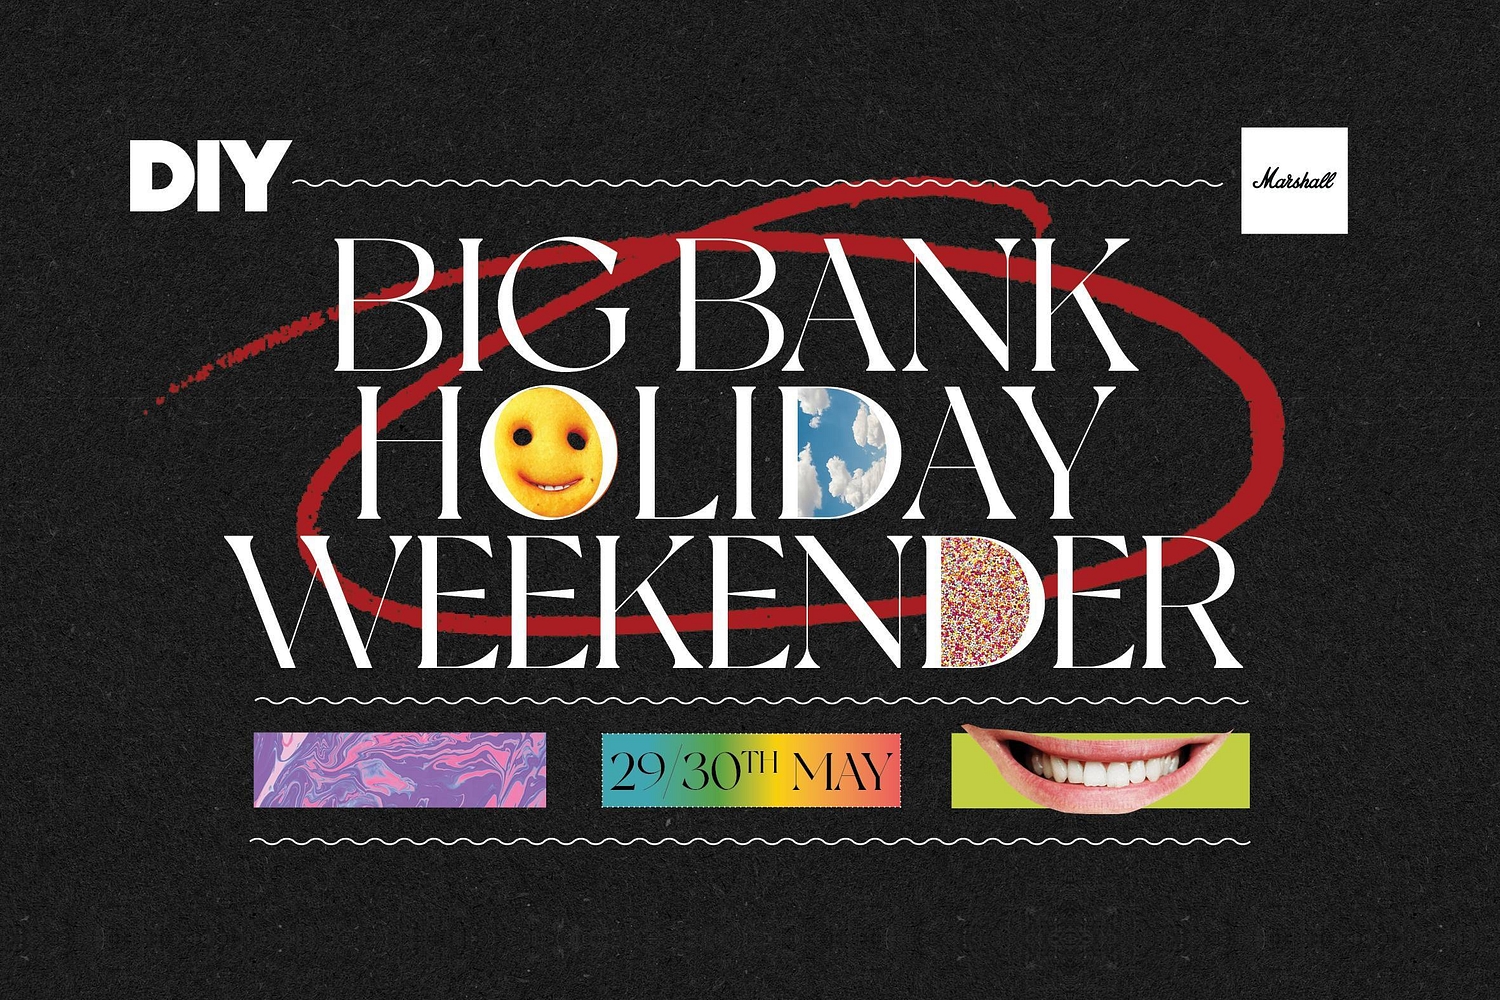 Goat Girl, The Orielles, Do Nothing, Connie Constance & more to play DIY’s Big Bank Holiday Weekender